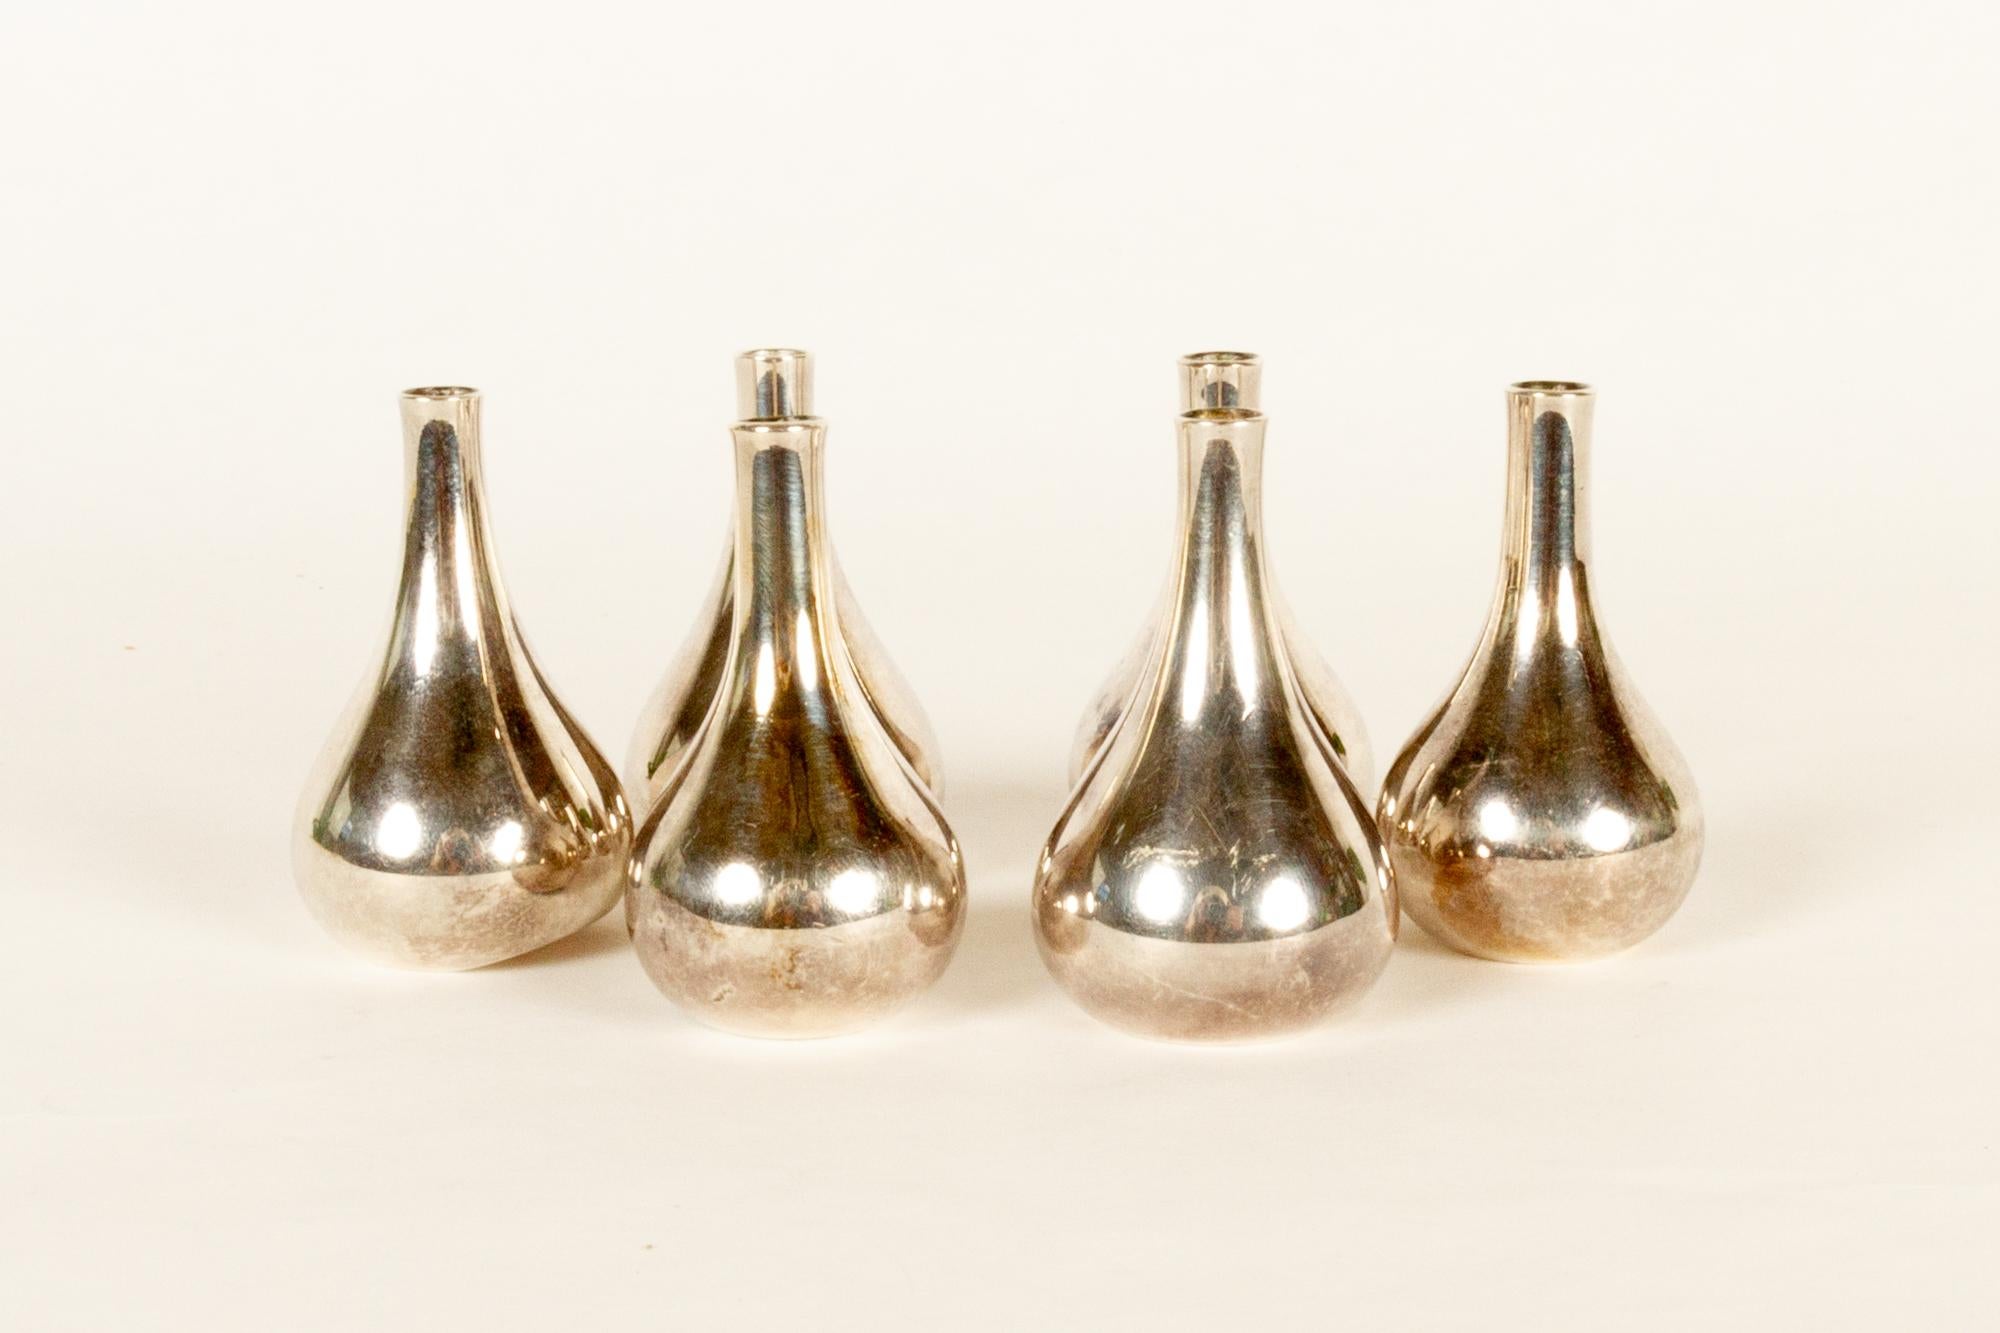 Candleholders by Jens H. Quistgaard for Dansk Designs 1960s set of 6
Set of six small silver plated onion shaped candle holders designed by Danish designer Jens Harald Quistgaard also known as IHQ. Can stand upright or tilted. Fits 8 mm candles.